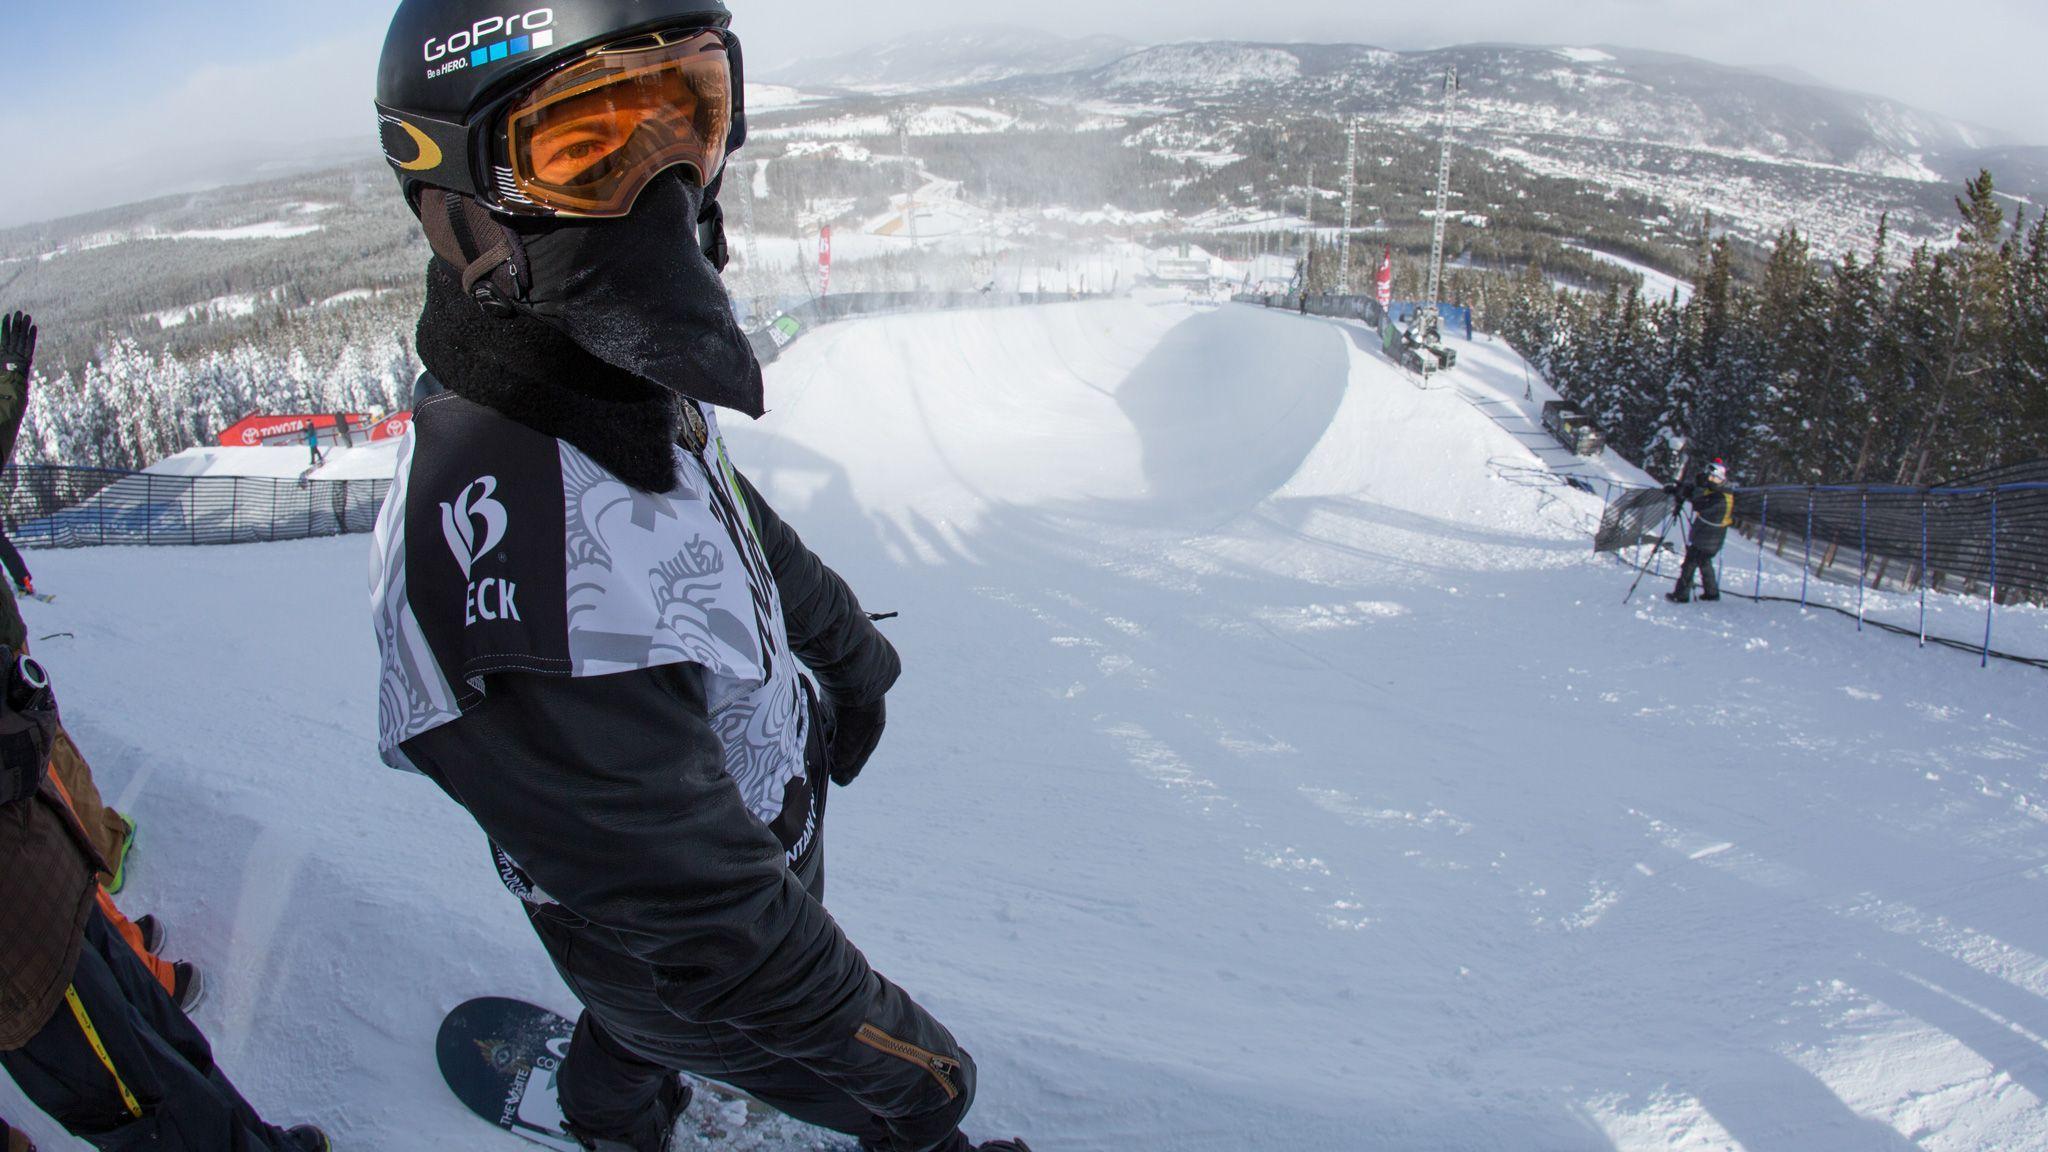 Shaun White and Kelly Clark top Dew Tour qualifiers